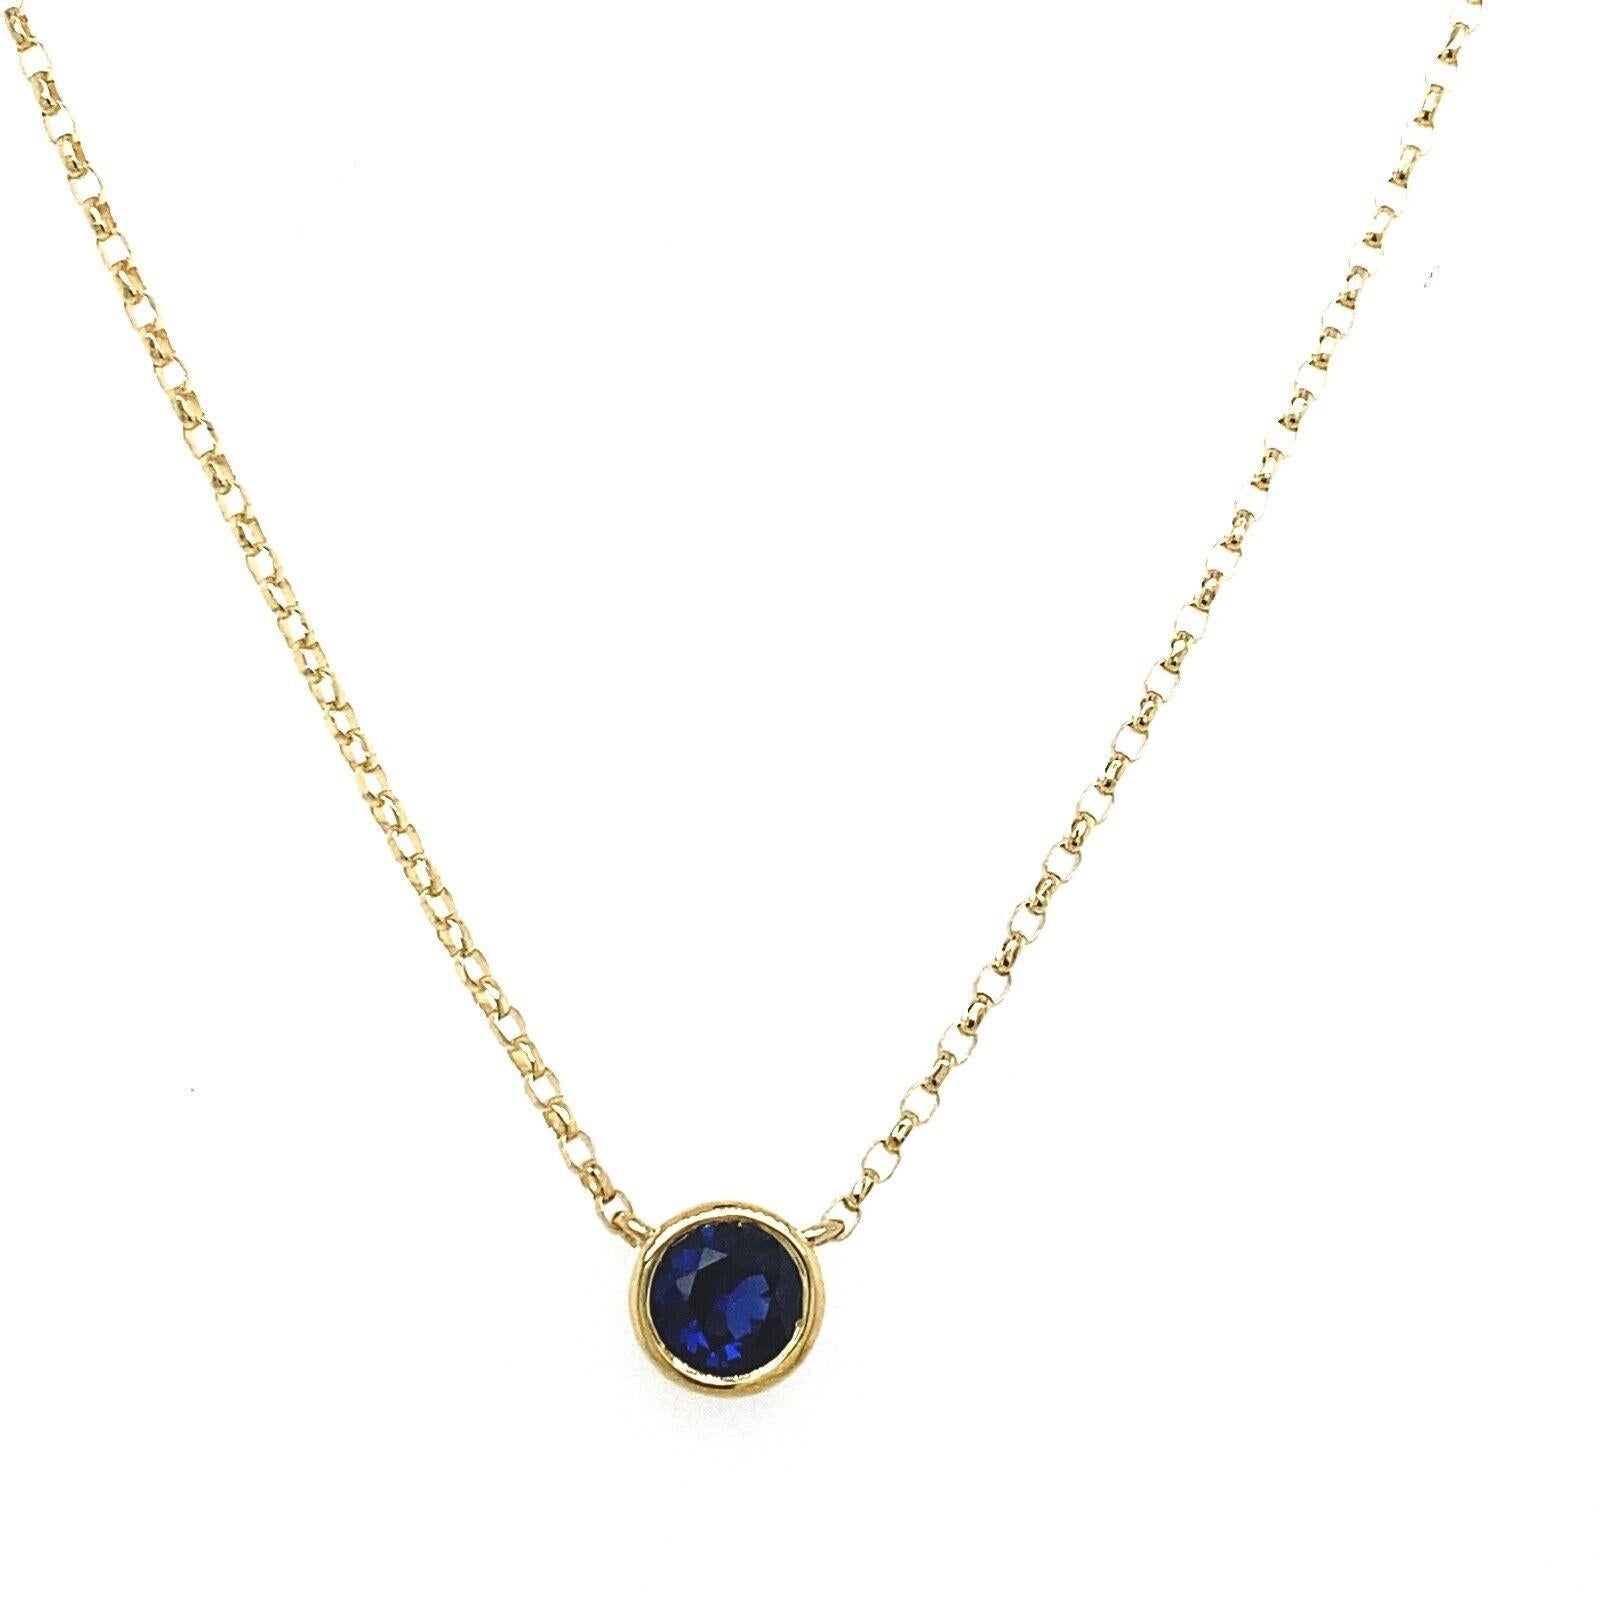 This 18ct Yellow Gold pendant set with a 0.34ct natural Sapphire stone is set on a 16